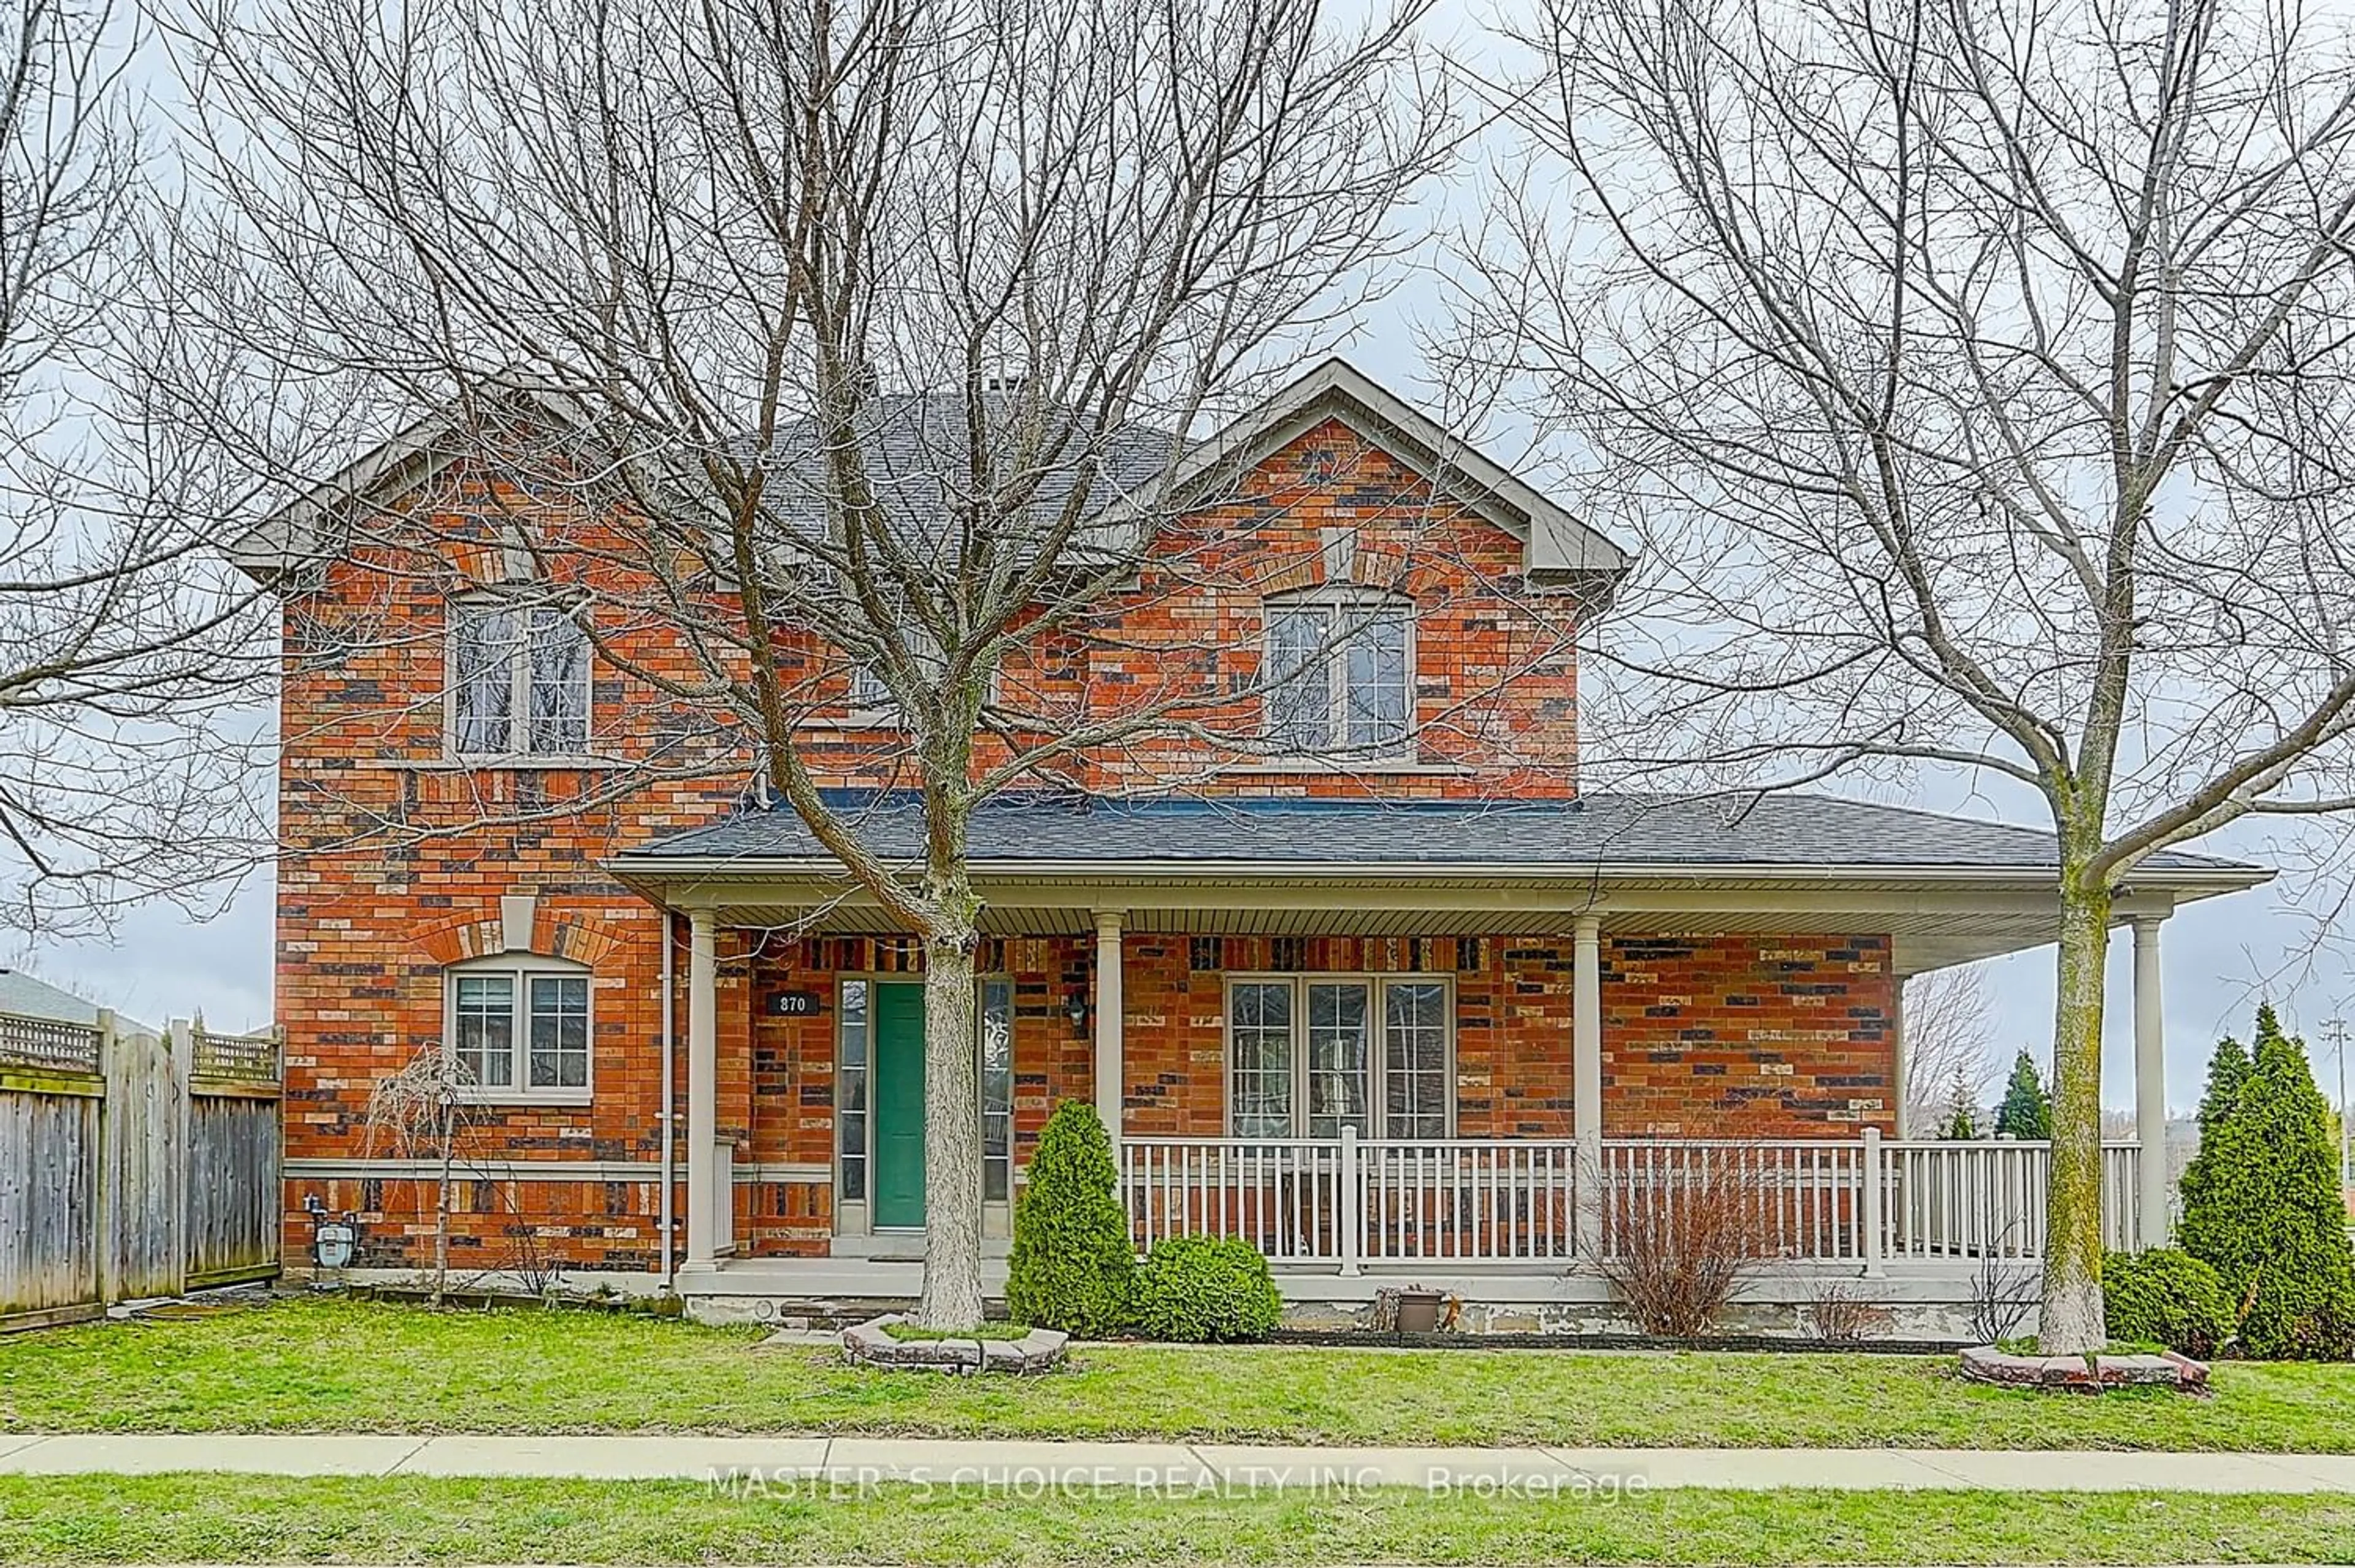 Home with brick exterior material for 870 Isaac Phillips Way, Newmarket Ontario L3X 2Y8